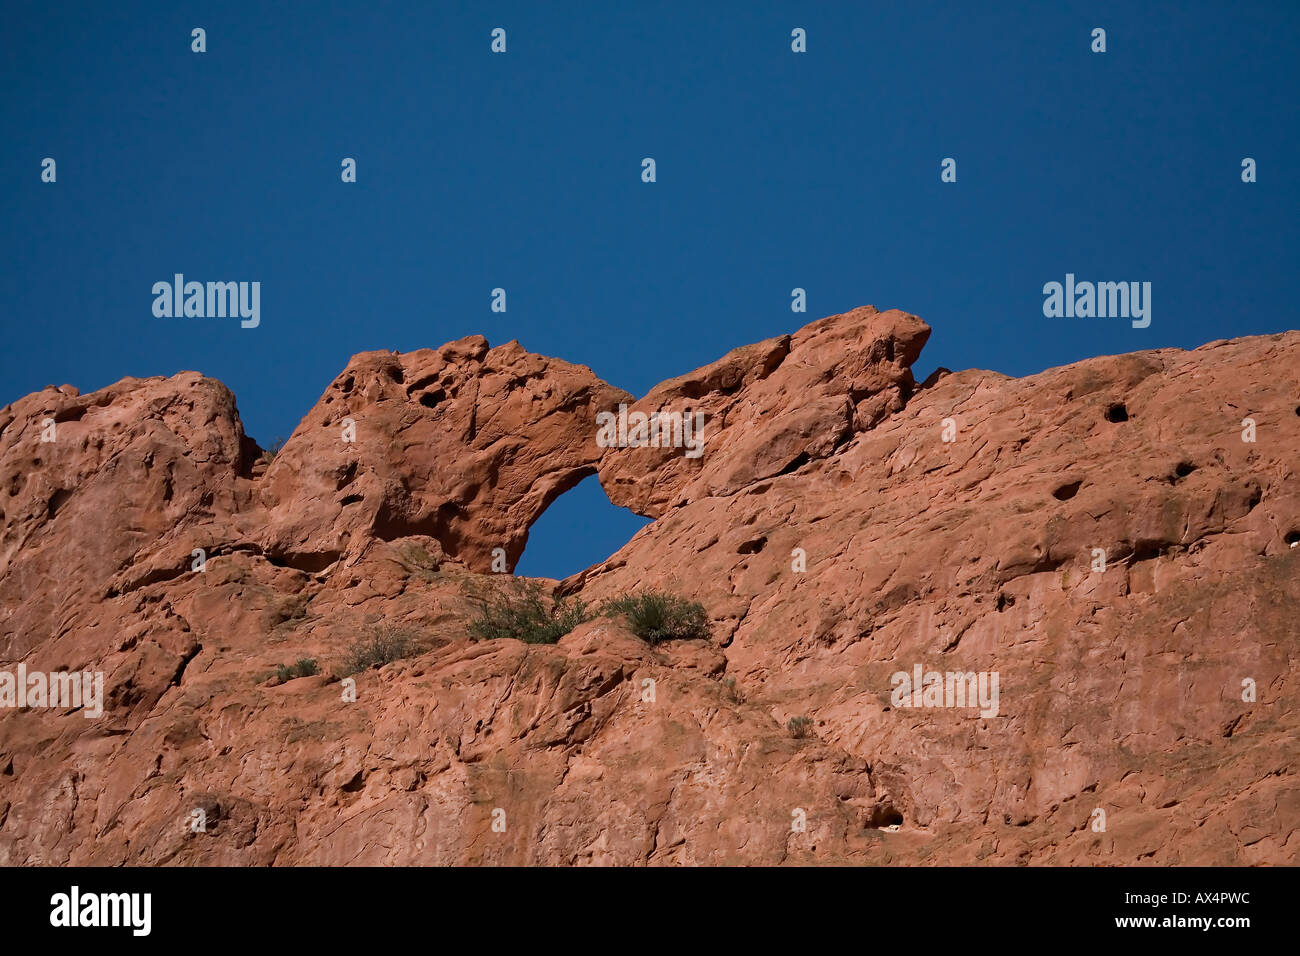 Kissing Camel Of The Garden Of The Gods Stock Photo 9559323 Alamy